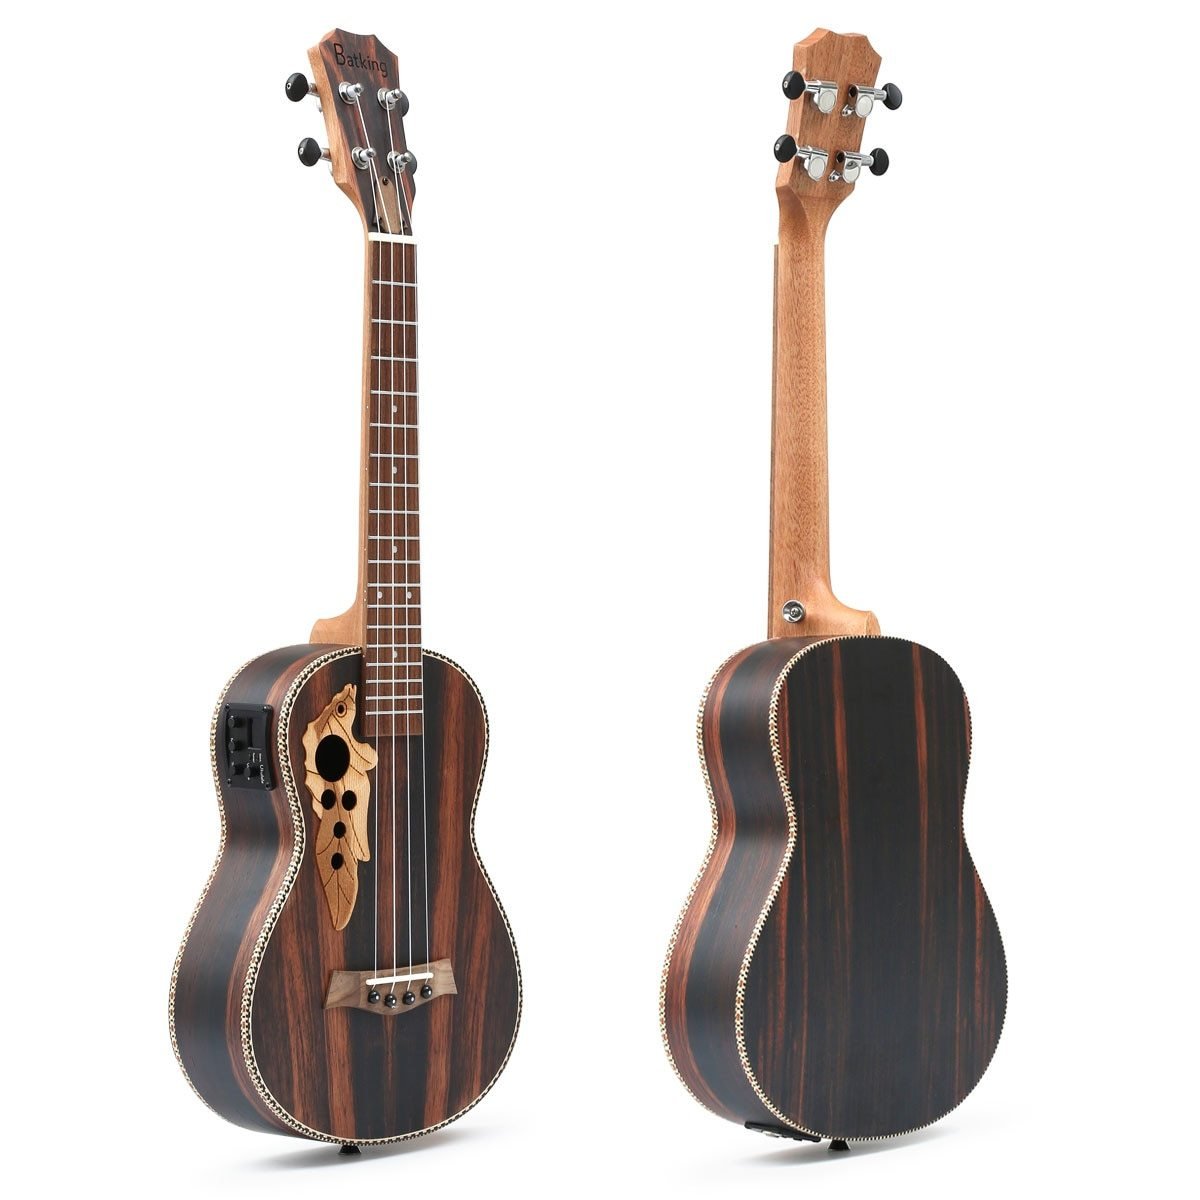 30 Inch All Blackwood Baritone Acoustic Electric Ukulele With Truss Rod with EQ with Gig Bag,Strap,Nylon String,Electric Tuner - AKLOT